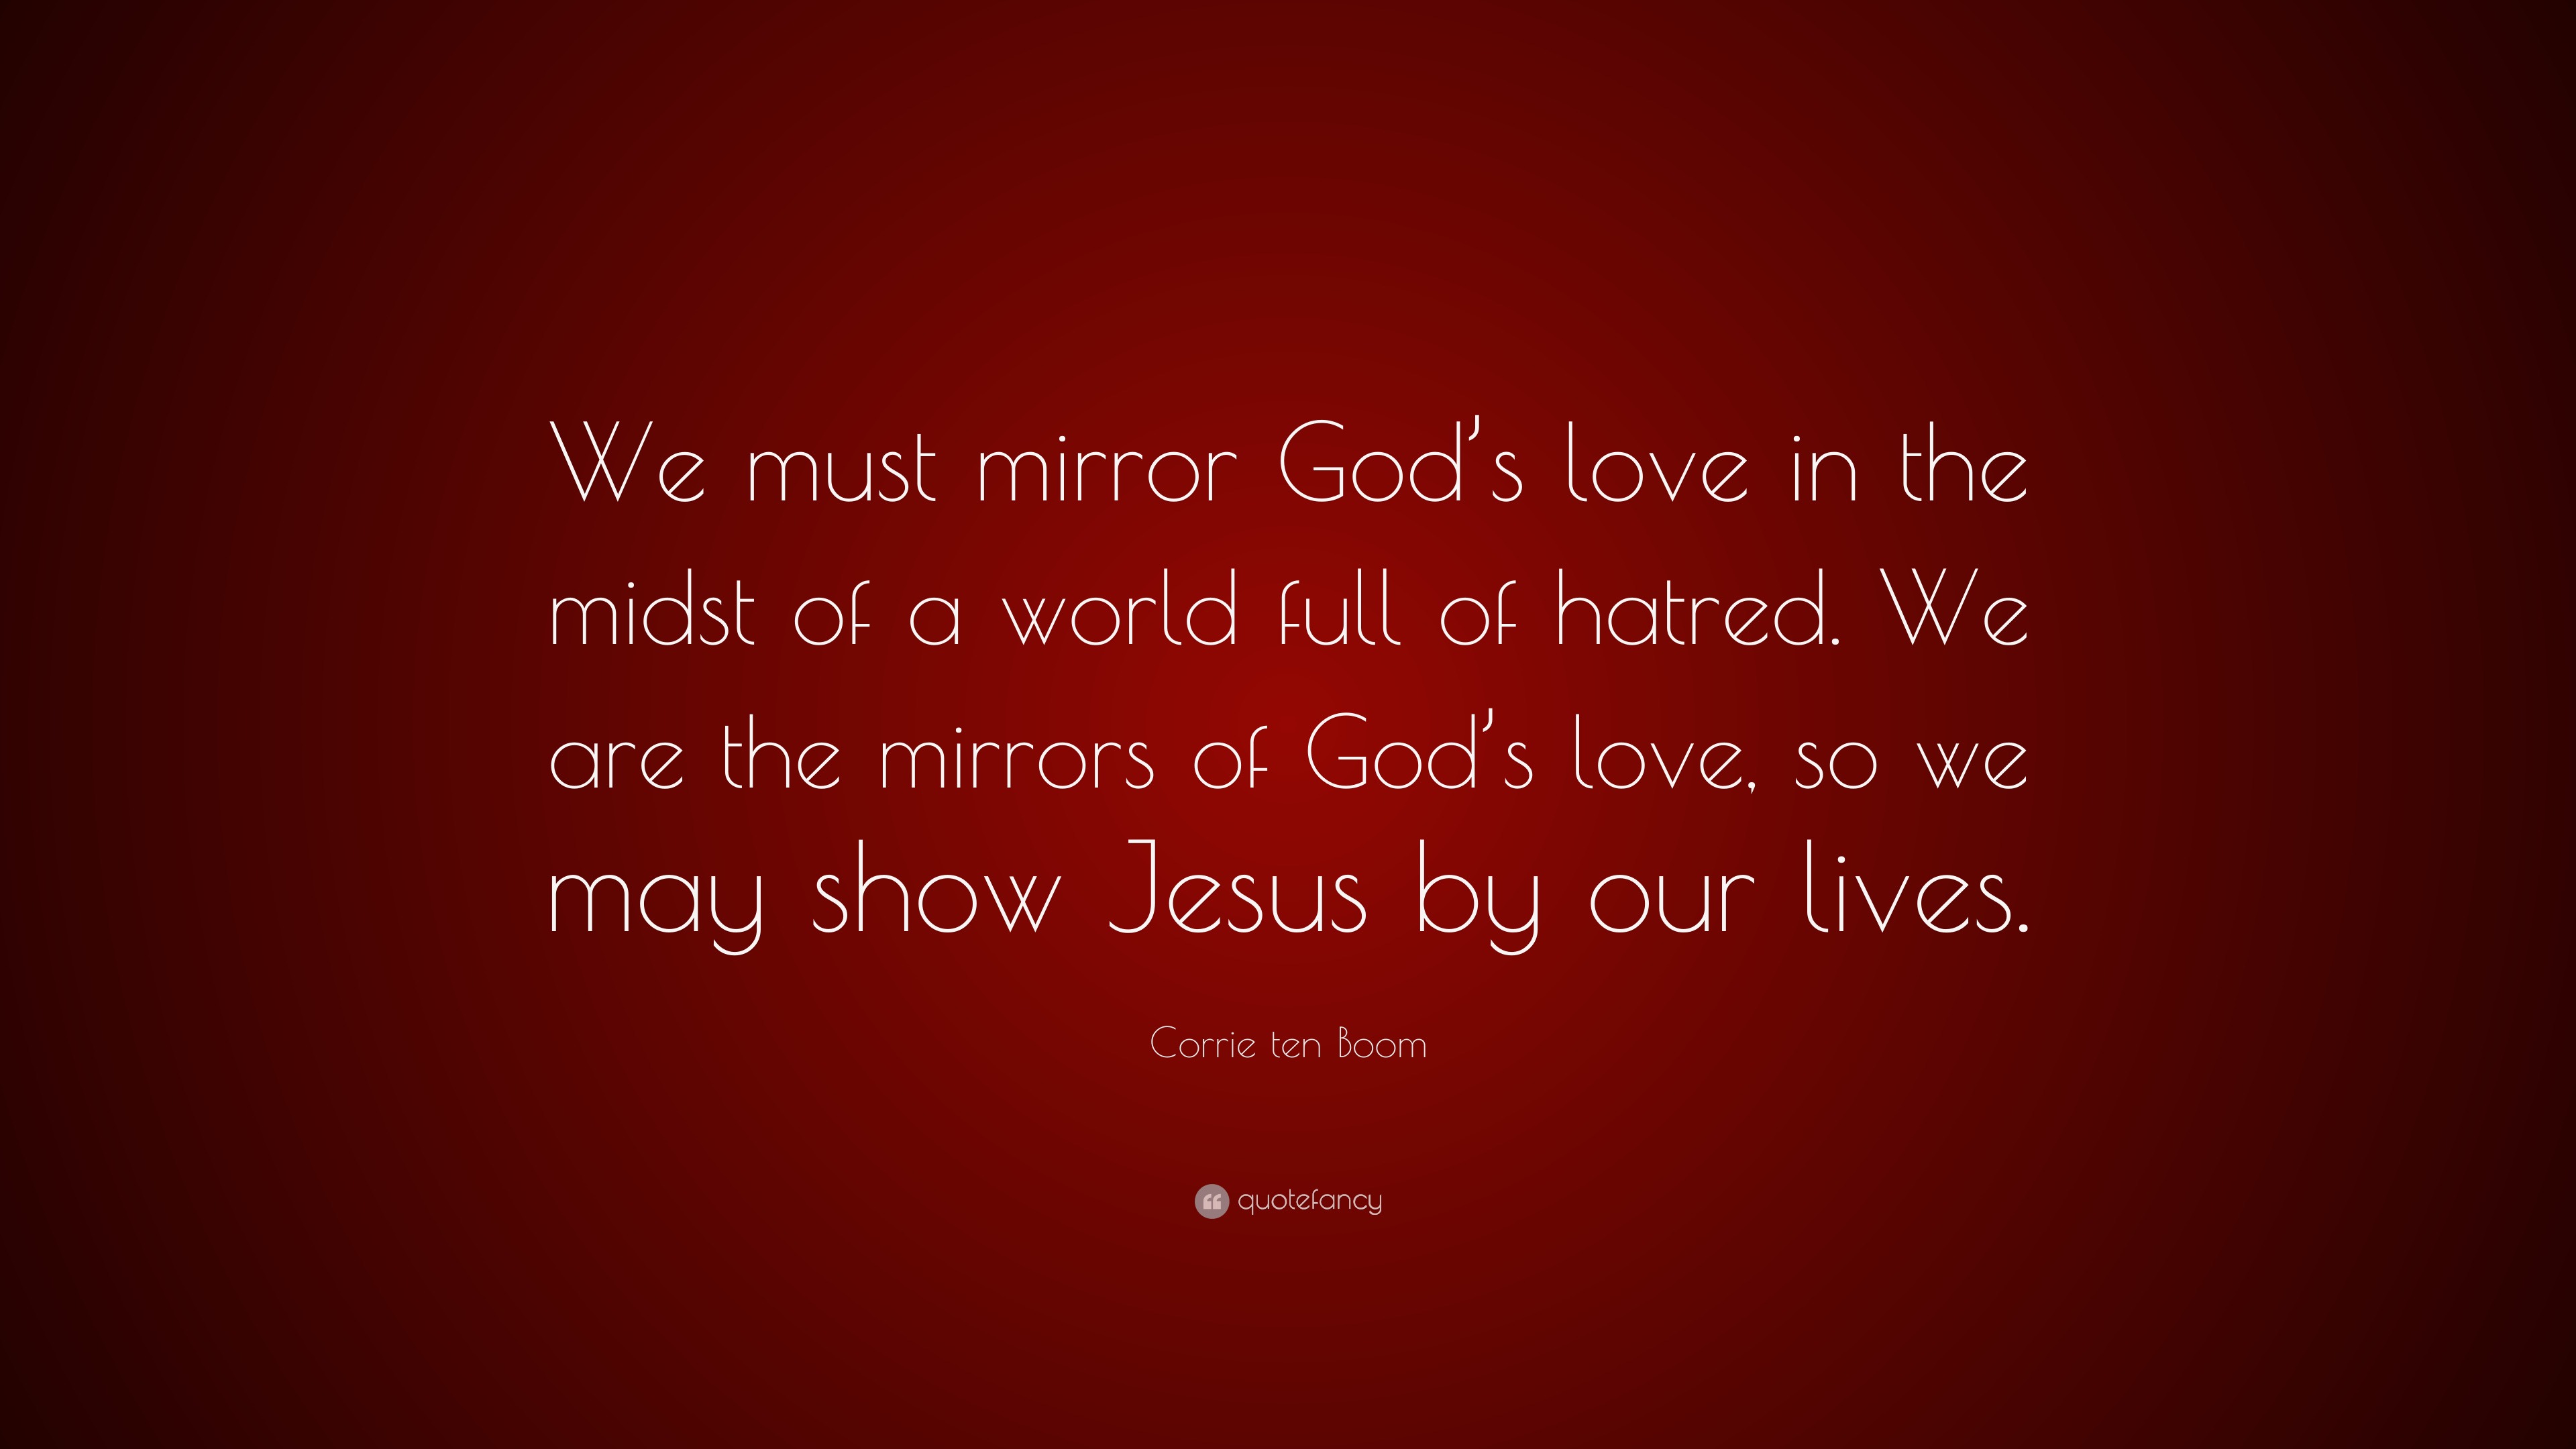 Corrie ten Boom Quote “We must mirror God s love in the midst of a